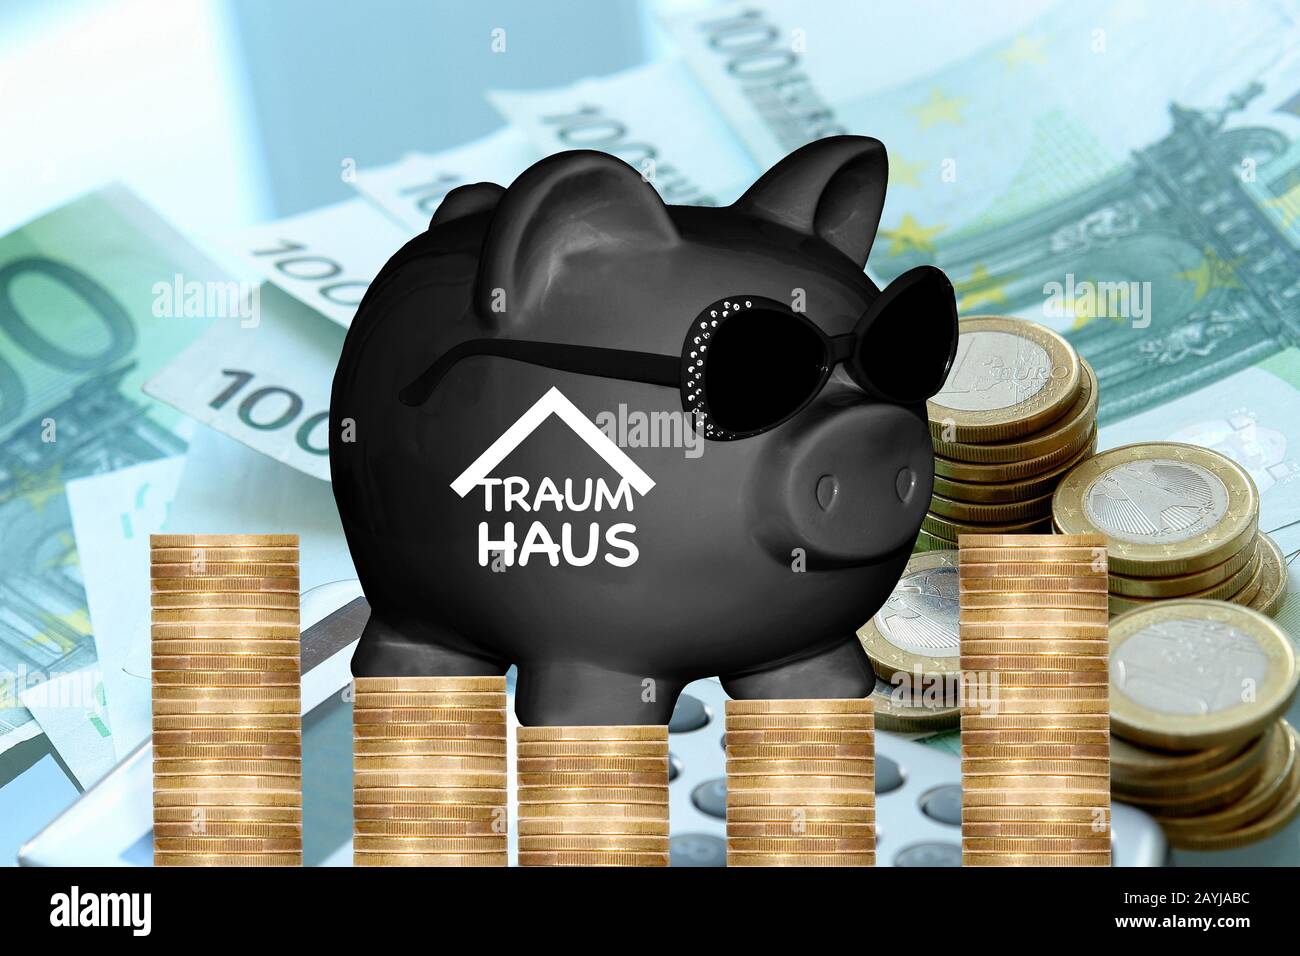 black piggy bank with sun glasses with lettering Traumhaus, dream house, coins and banknotes in background, composing Stock Photo